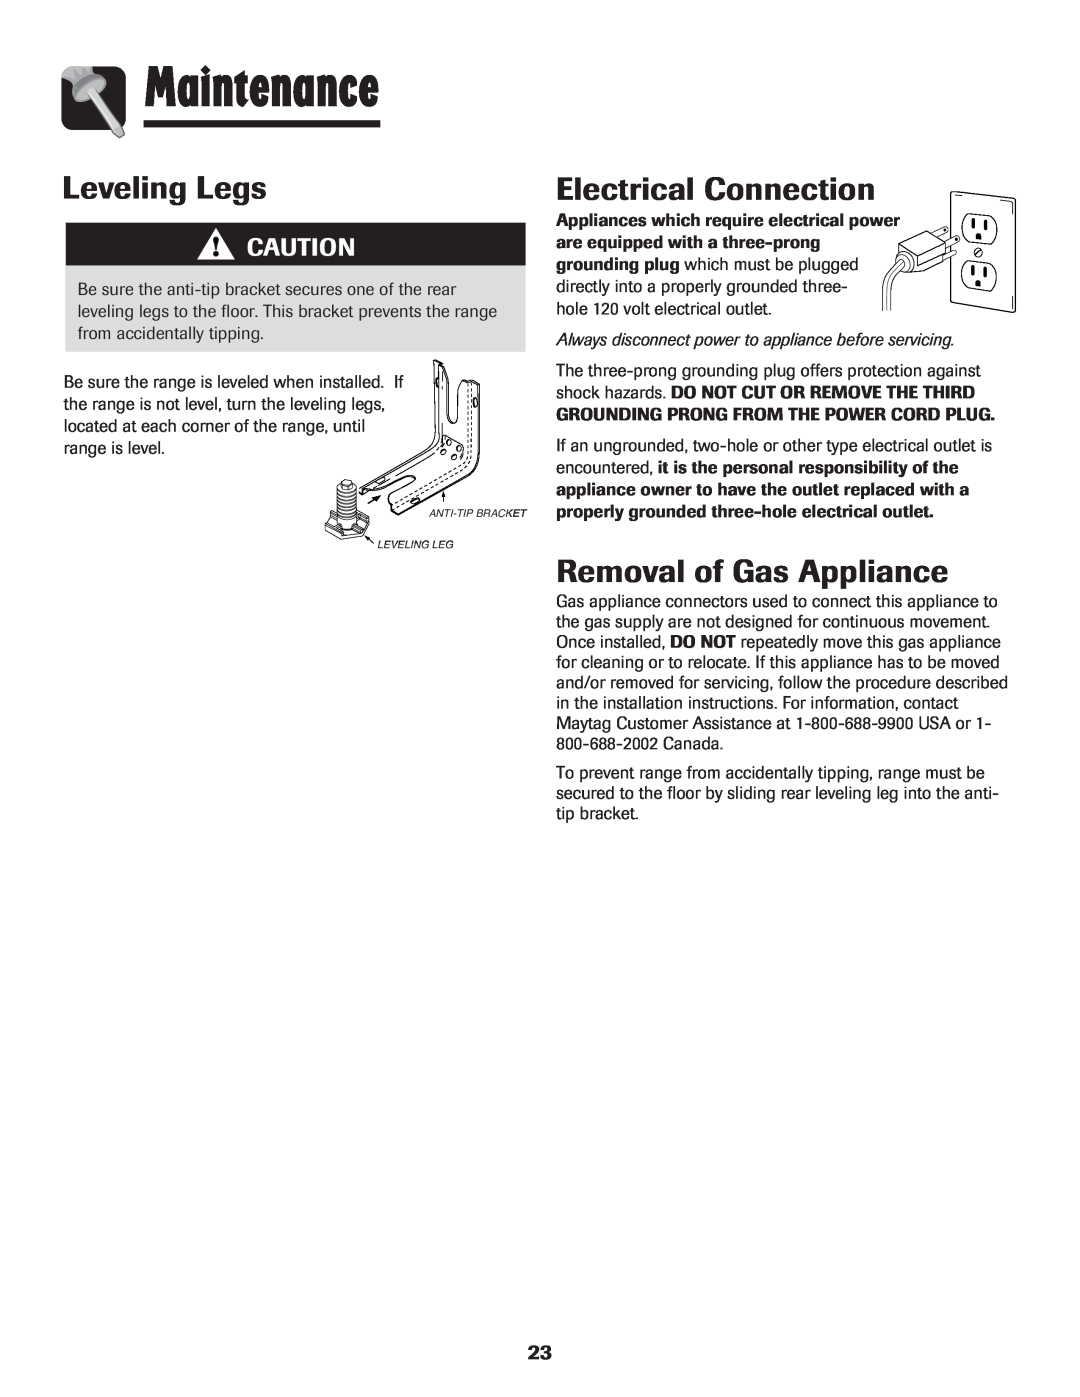 Maytag 850 important safety instructions Leveling Legs, Electrical Connection, Removal of Gas Appliance, Maintenance 